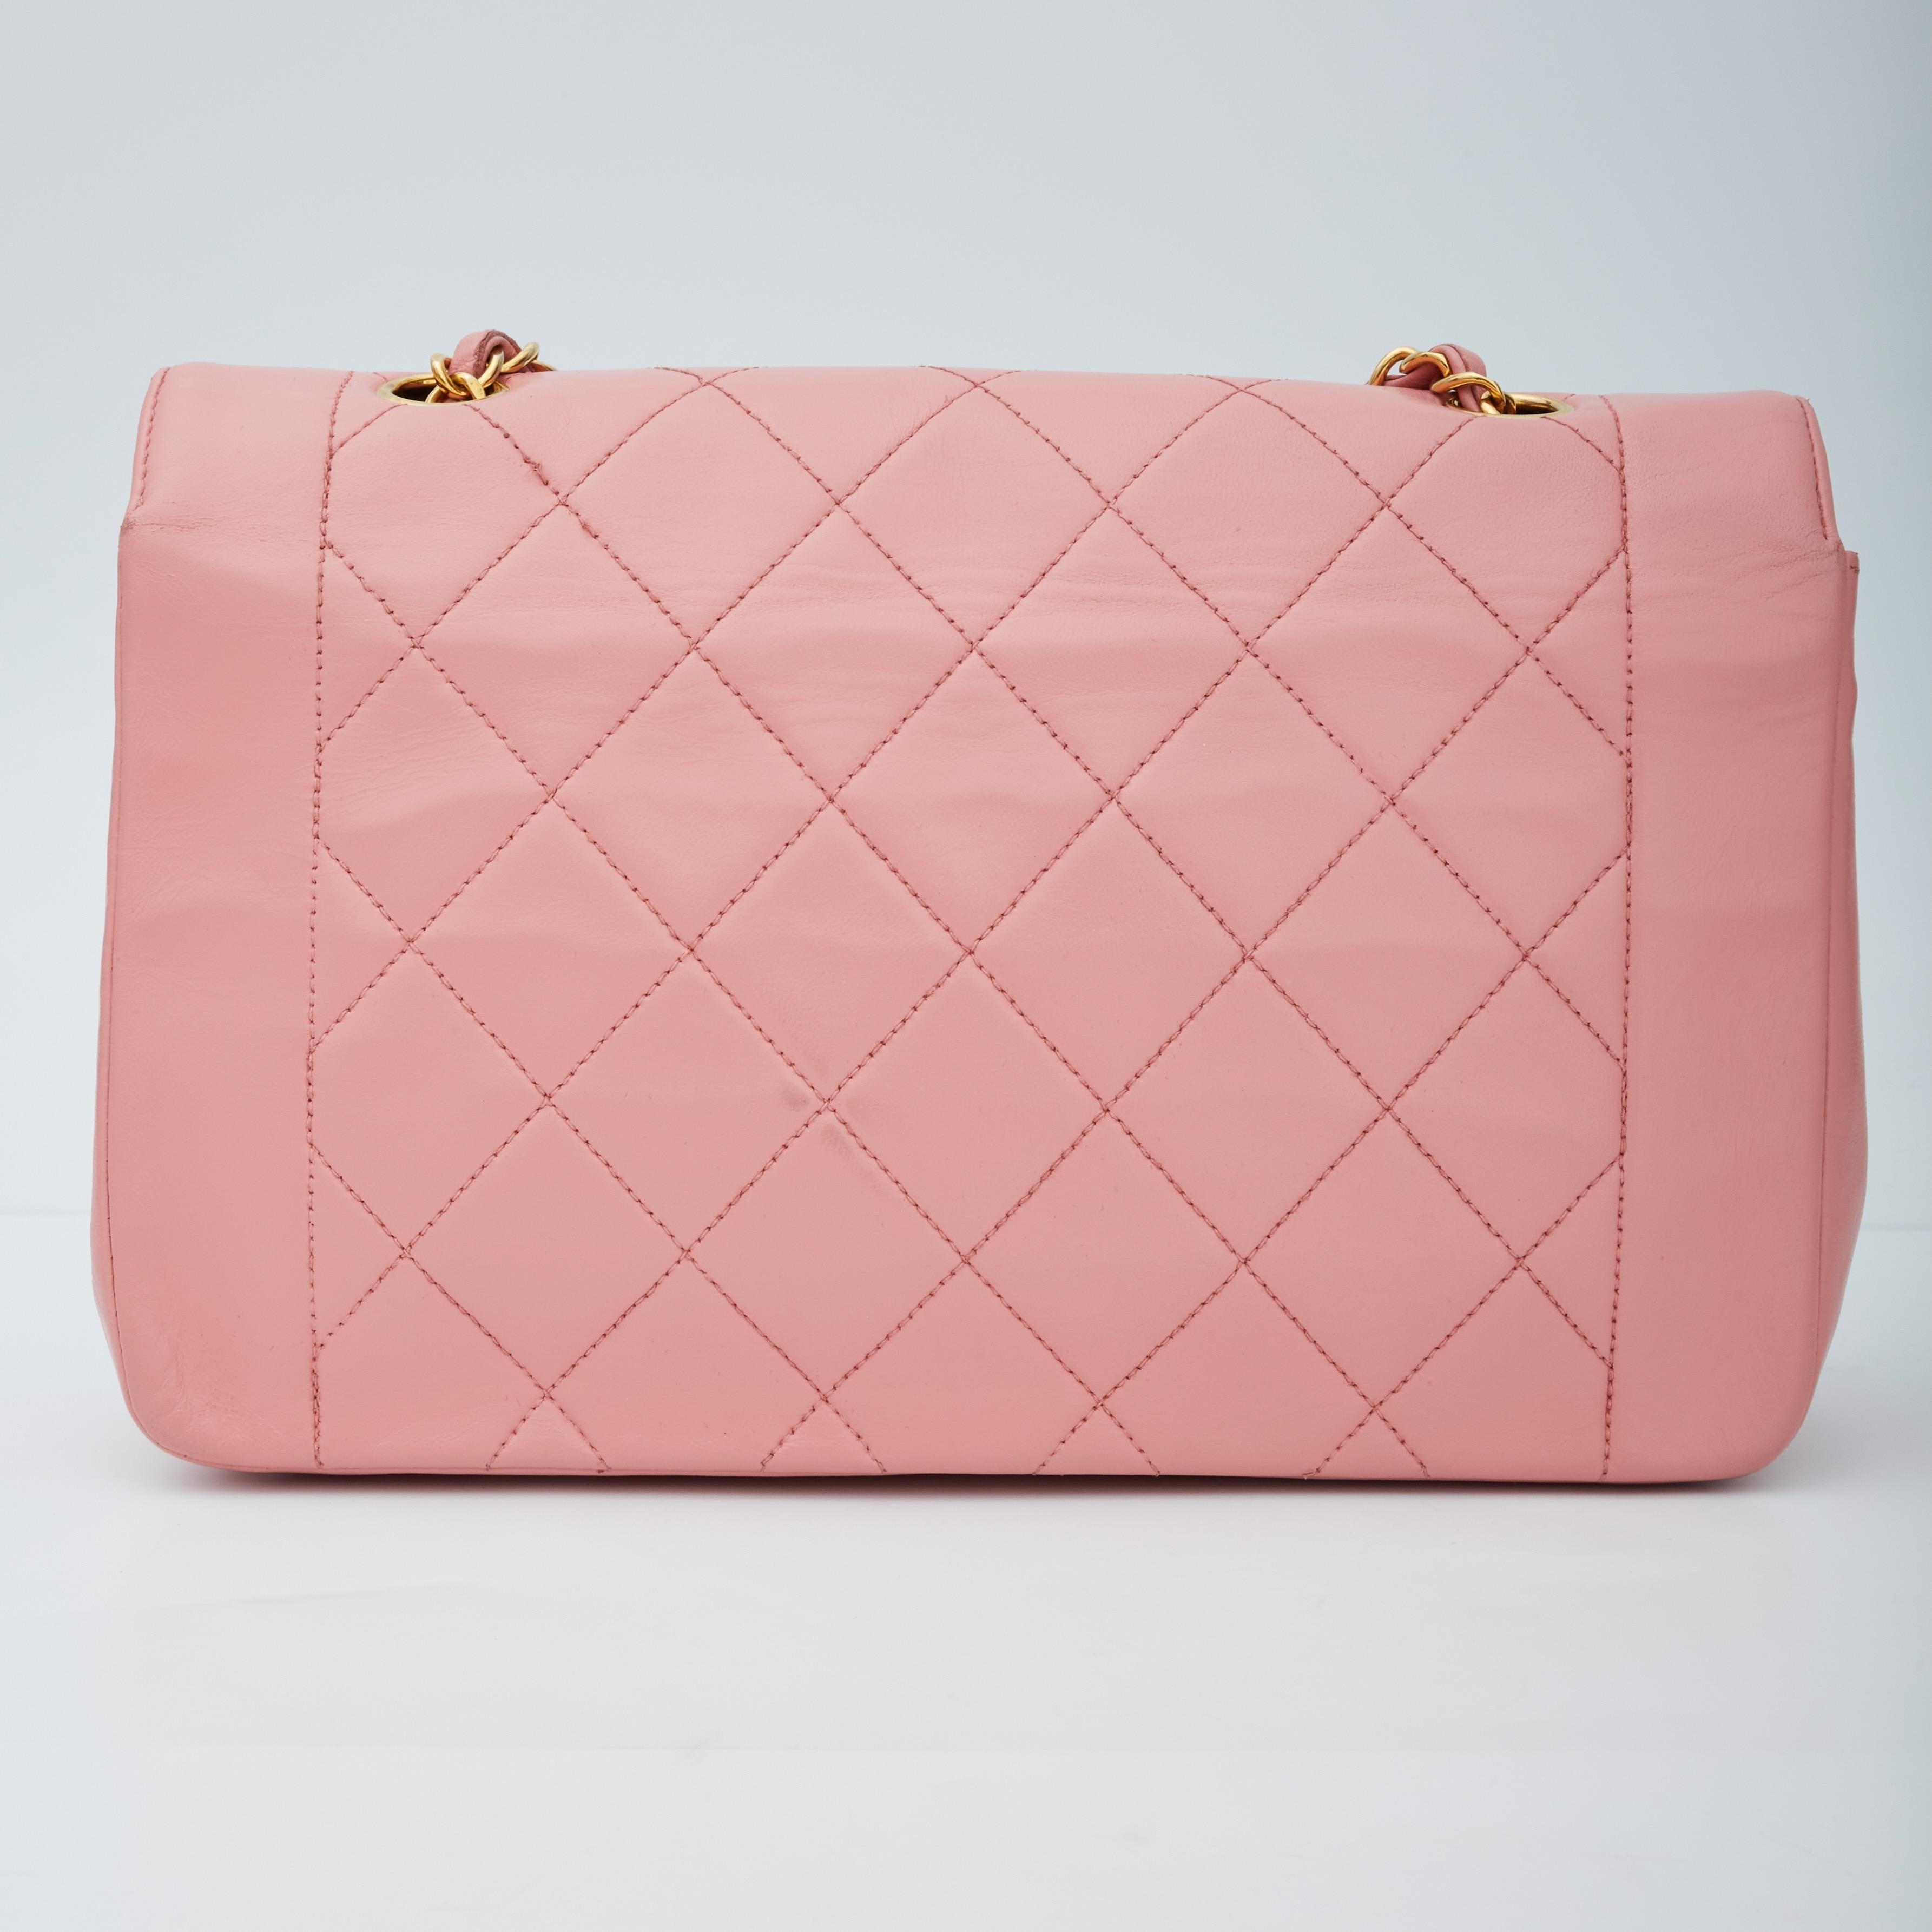 This classic model nicknamed the Diana is constructed of supple diamond-quilted lambskin leather in pink. The shoulder bag features a waist-length polished gold chain-link and leather shoulder strap, Chanel CC turn lock closure on front flap and a